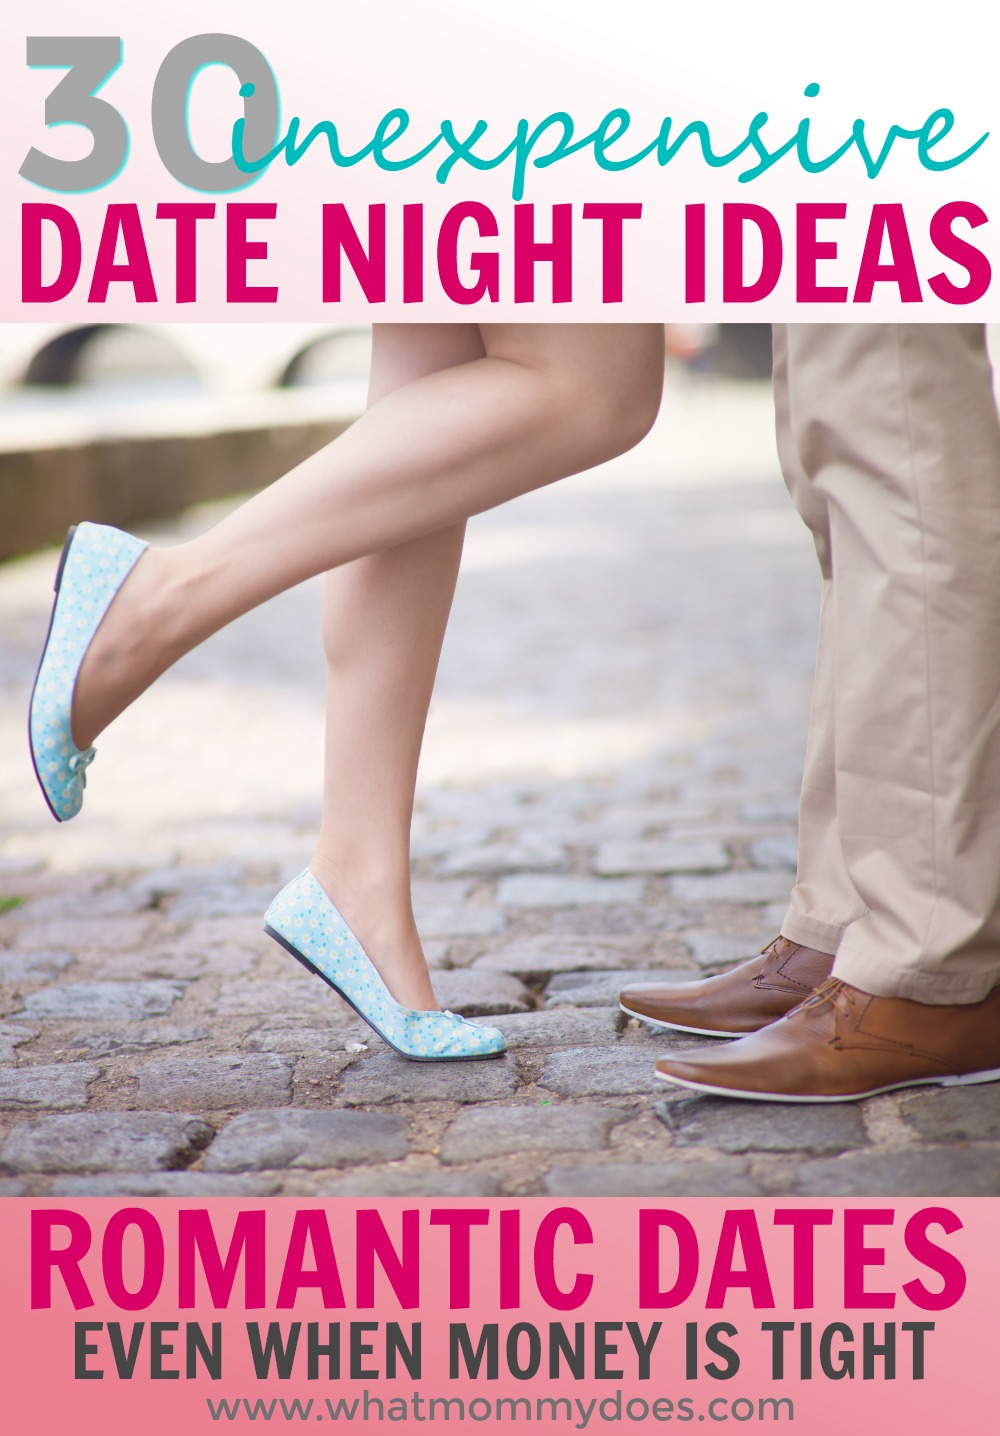 Looking for romatnic date night ideas that won't break the bank? You can still go on creative dates with your husband…at home or out on the town…you just need to get creative! These are great for Valentine's Day date nights, too! | fun date ideas for a small budget!